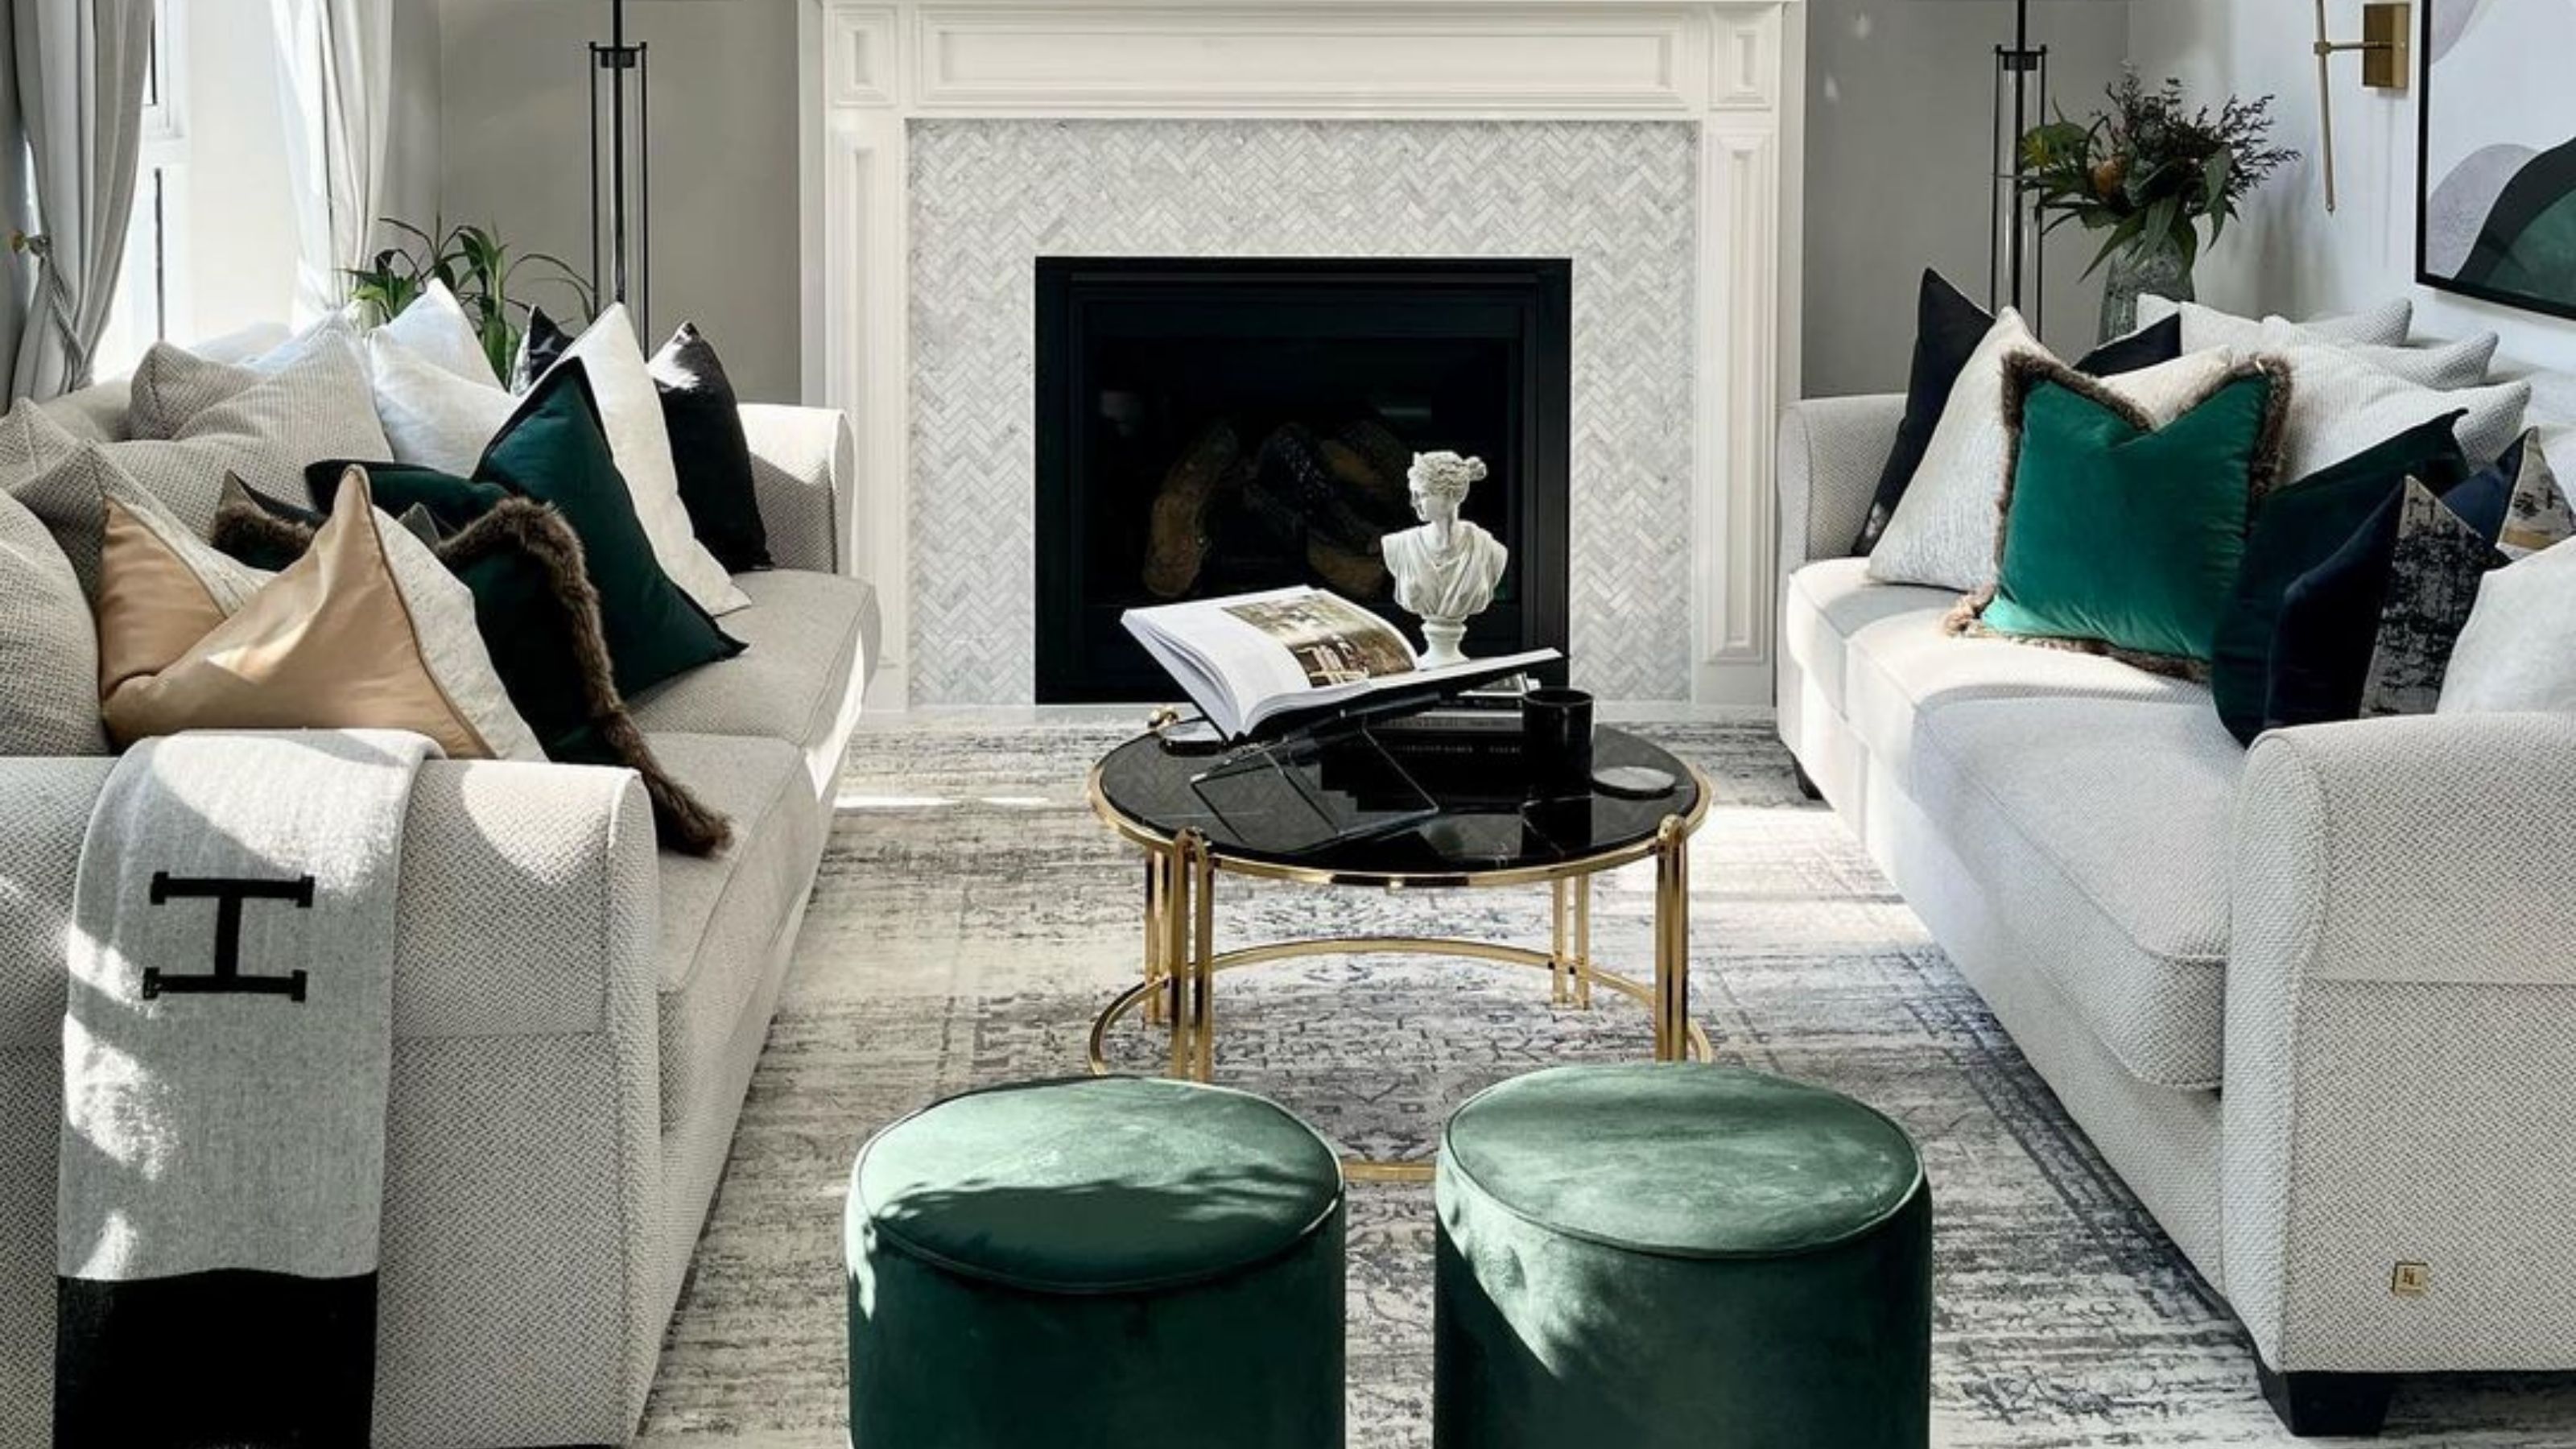 House & Home - 75+ Things That Make Regular Rooms Look Luxe